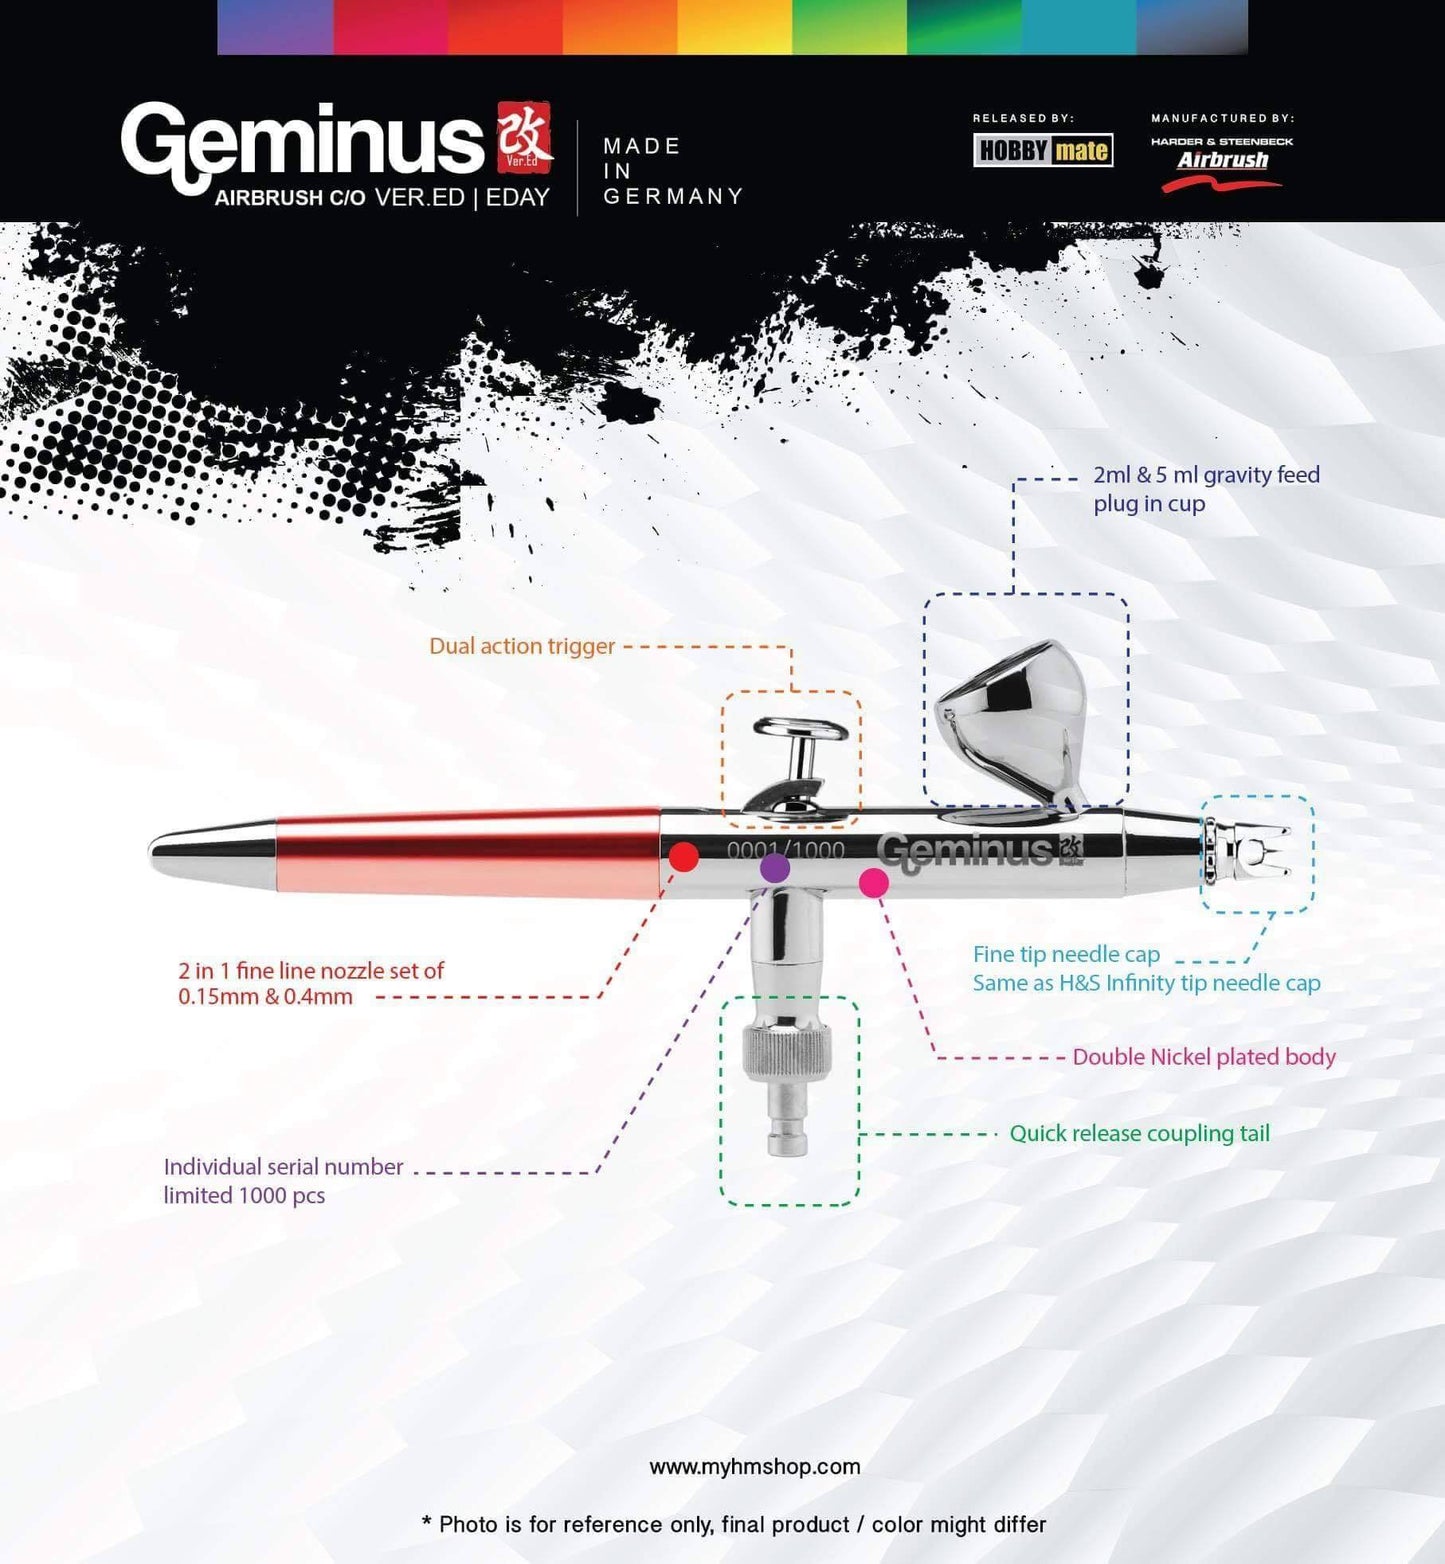 Harder & Steenbeck Geminus Ver. Ed (Two in One 0.15mm & 0.4mm nozzle)